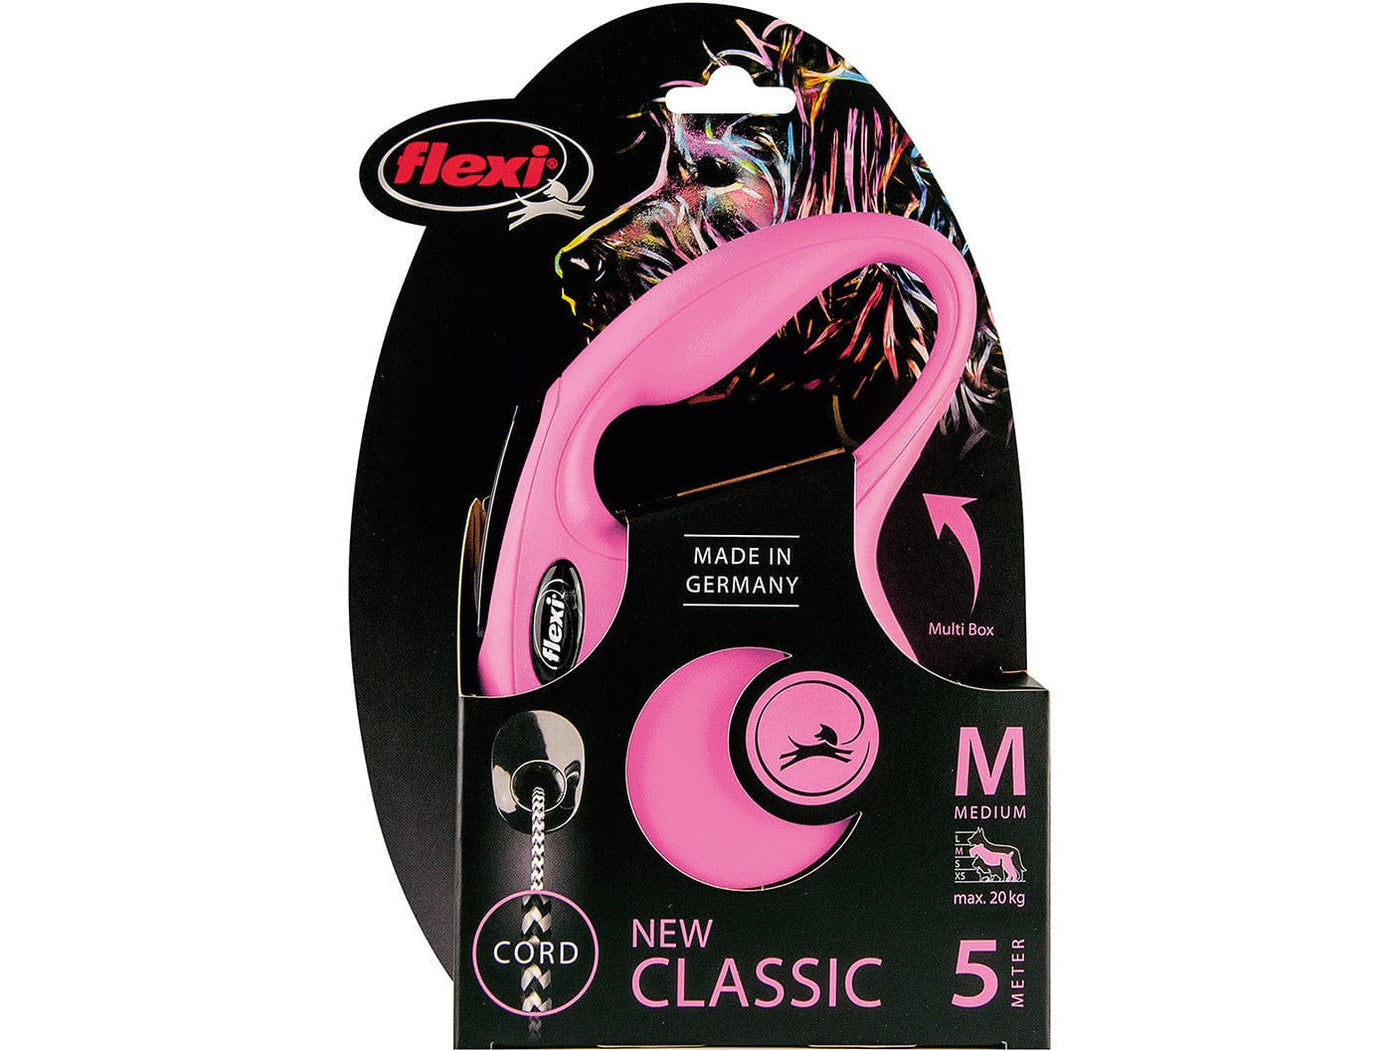 FLEXI NEW CLASSIC CORD S/5M pink